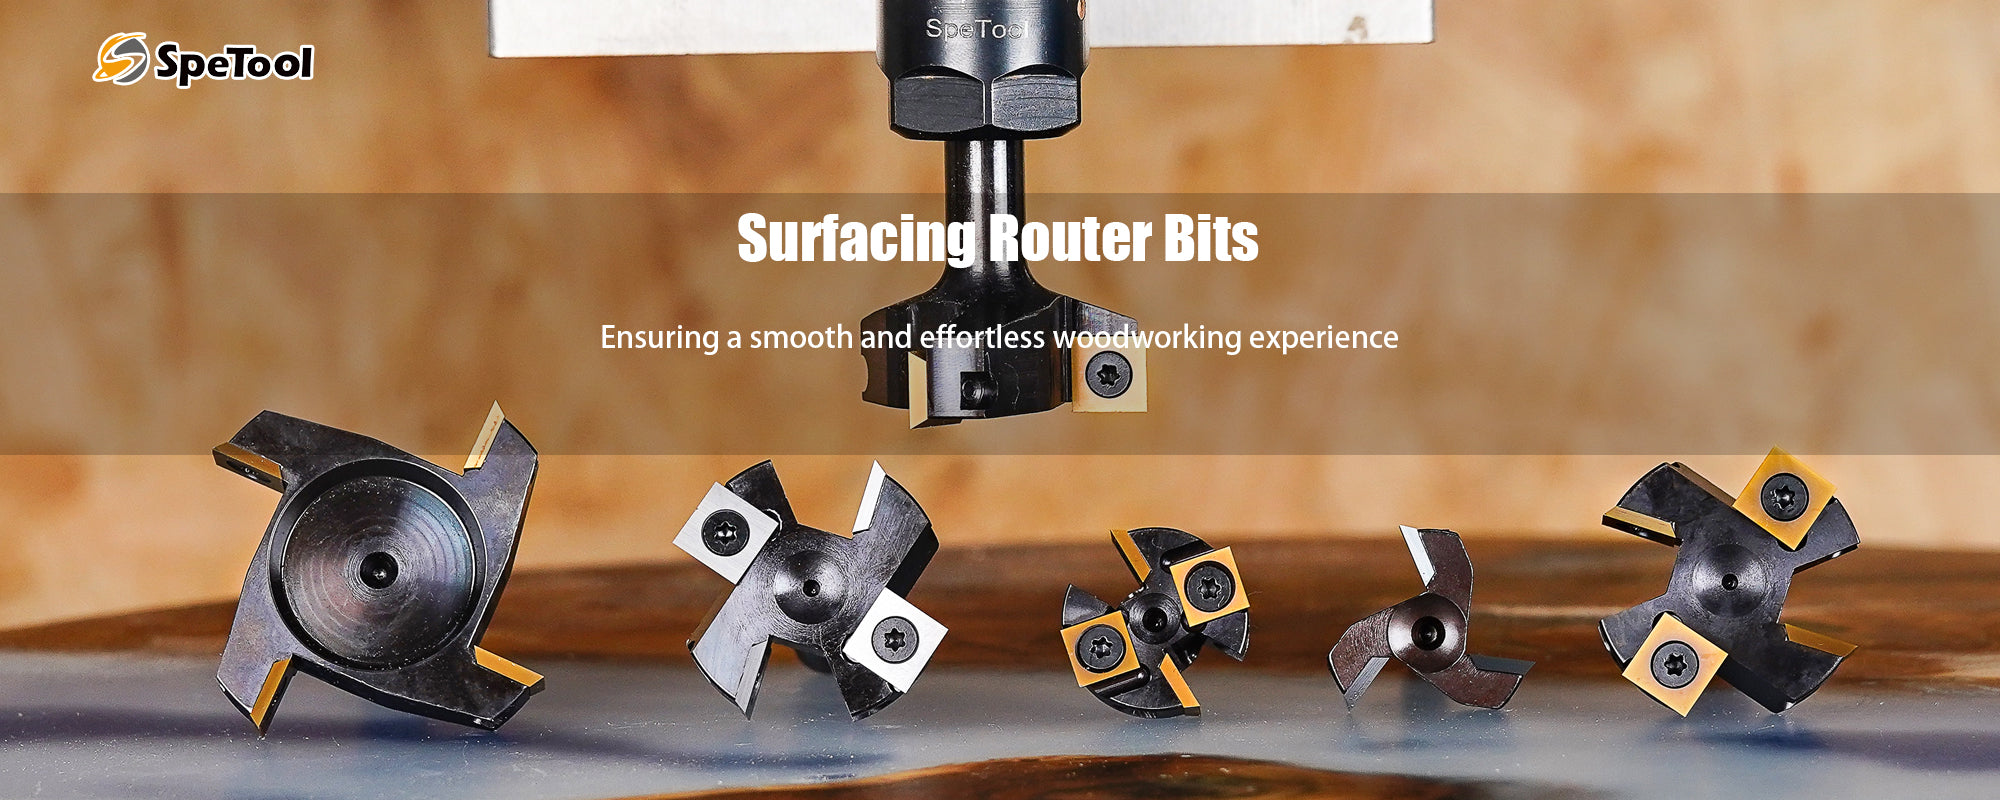 SpeTool surfacing router bits